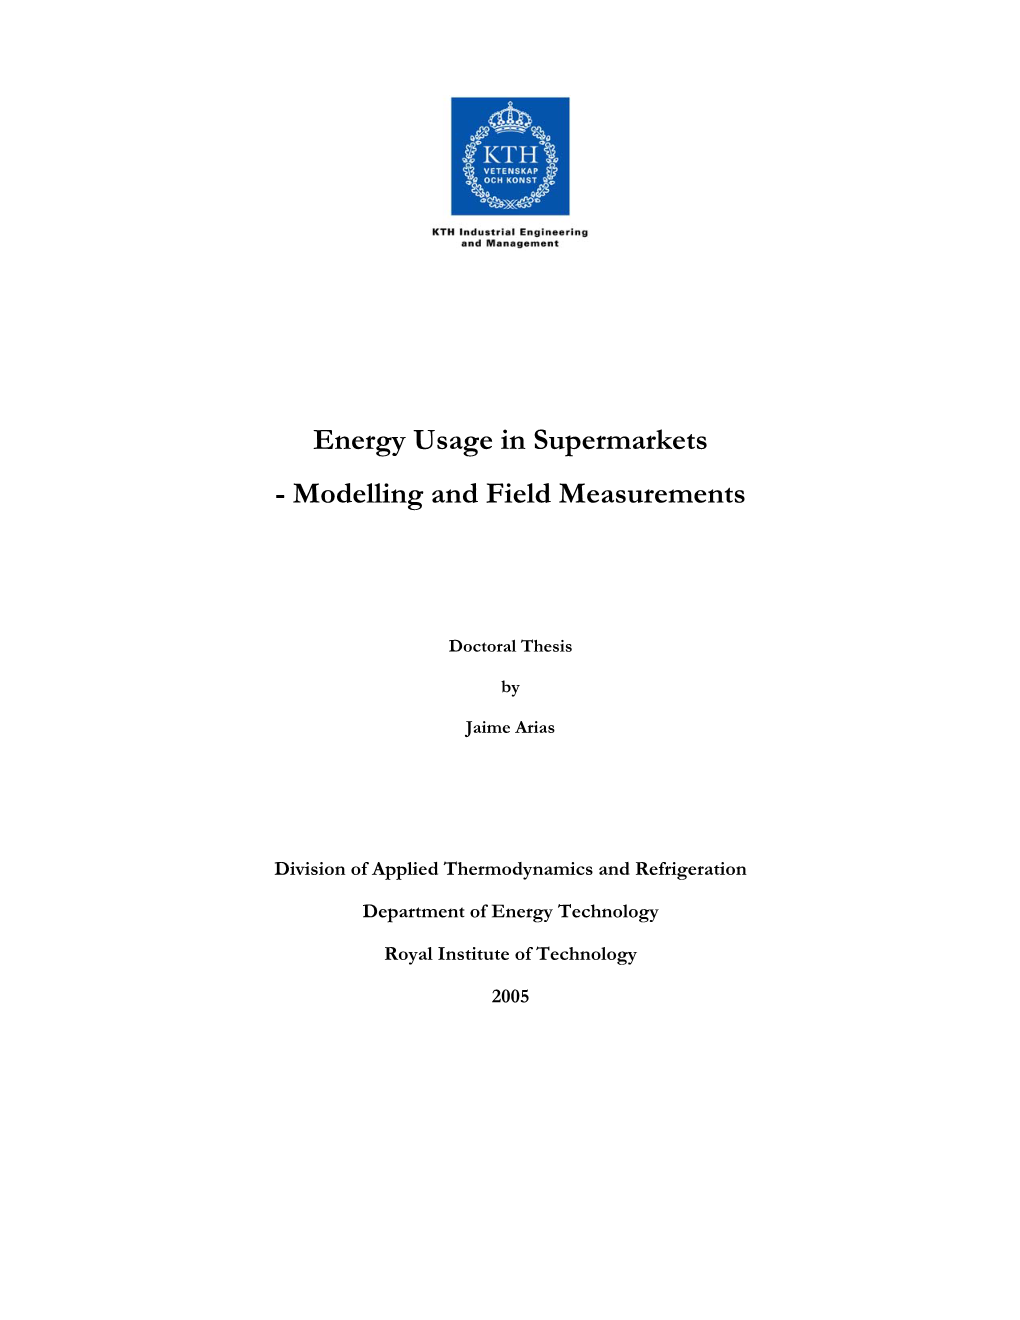 Energy Usage in Supermarkets - Modelling and Field Measurements